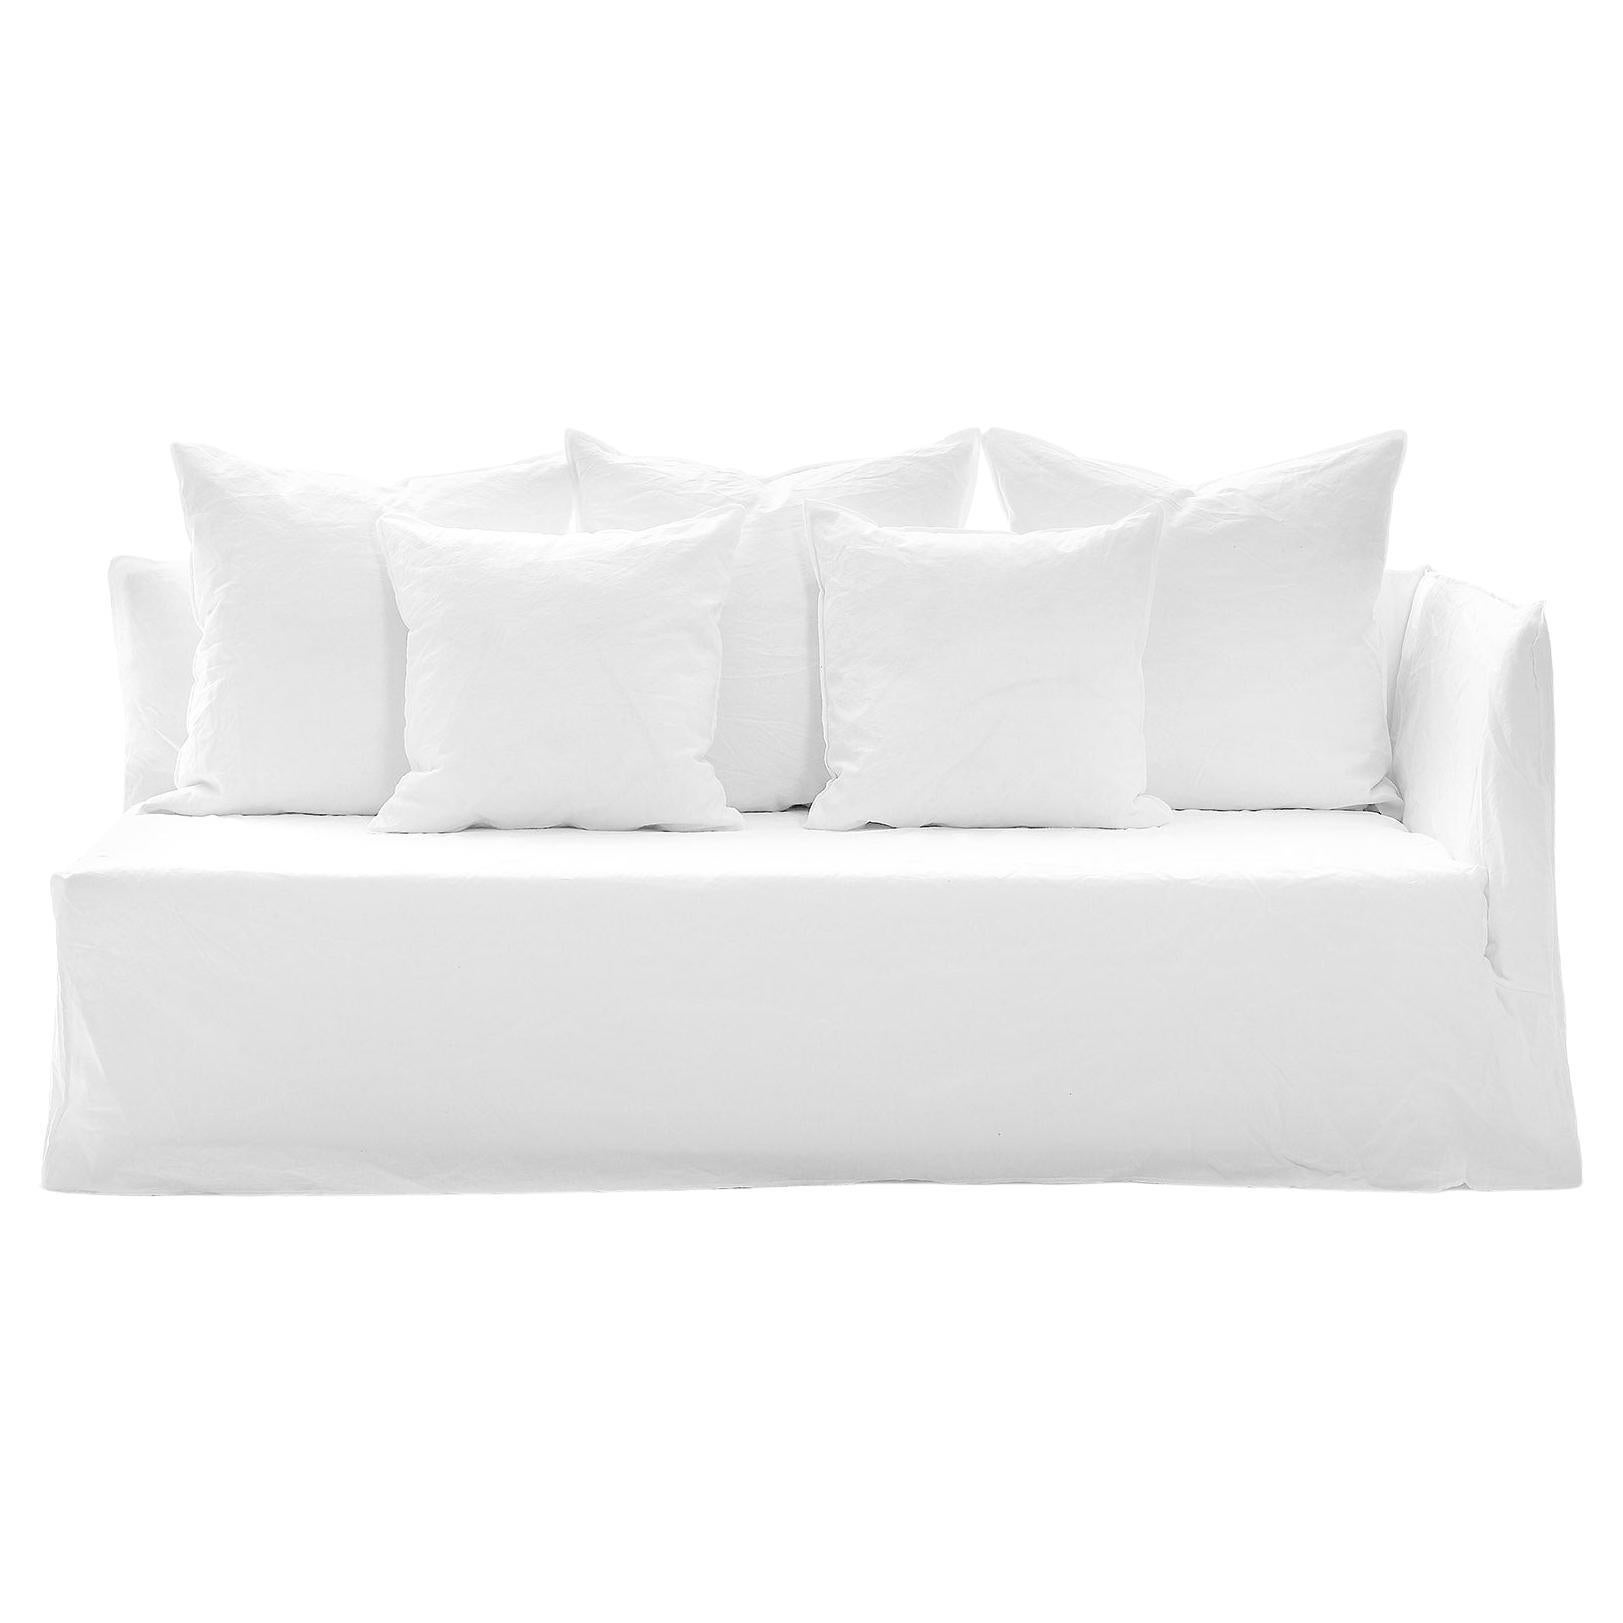 Gervasoni Ghost 21 R Modular Sofa in White Linen Upholstery by Paola Navone